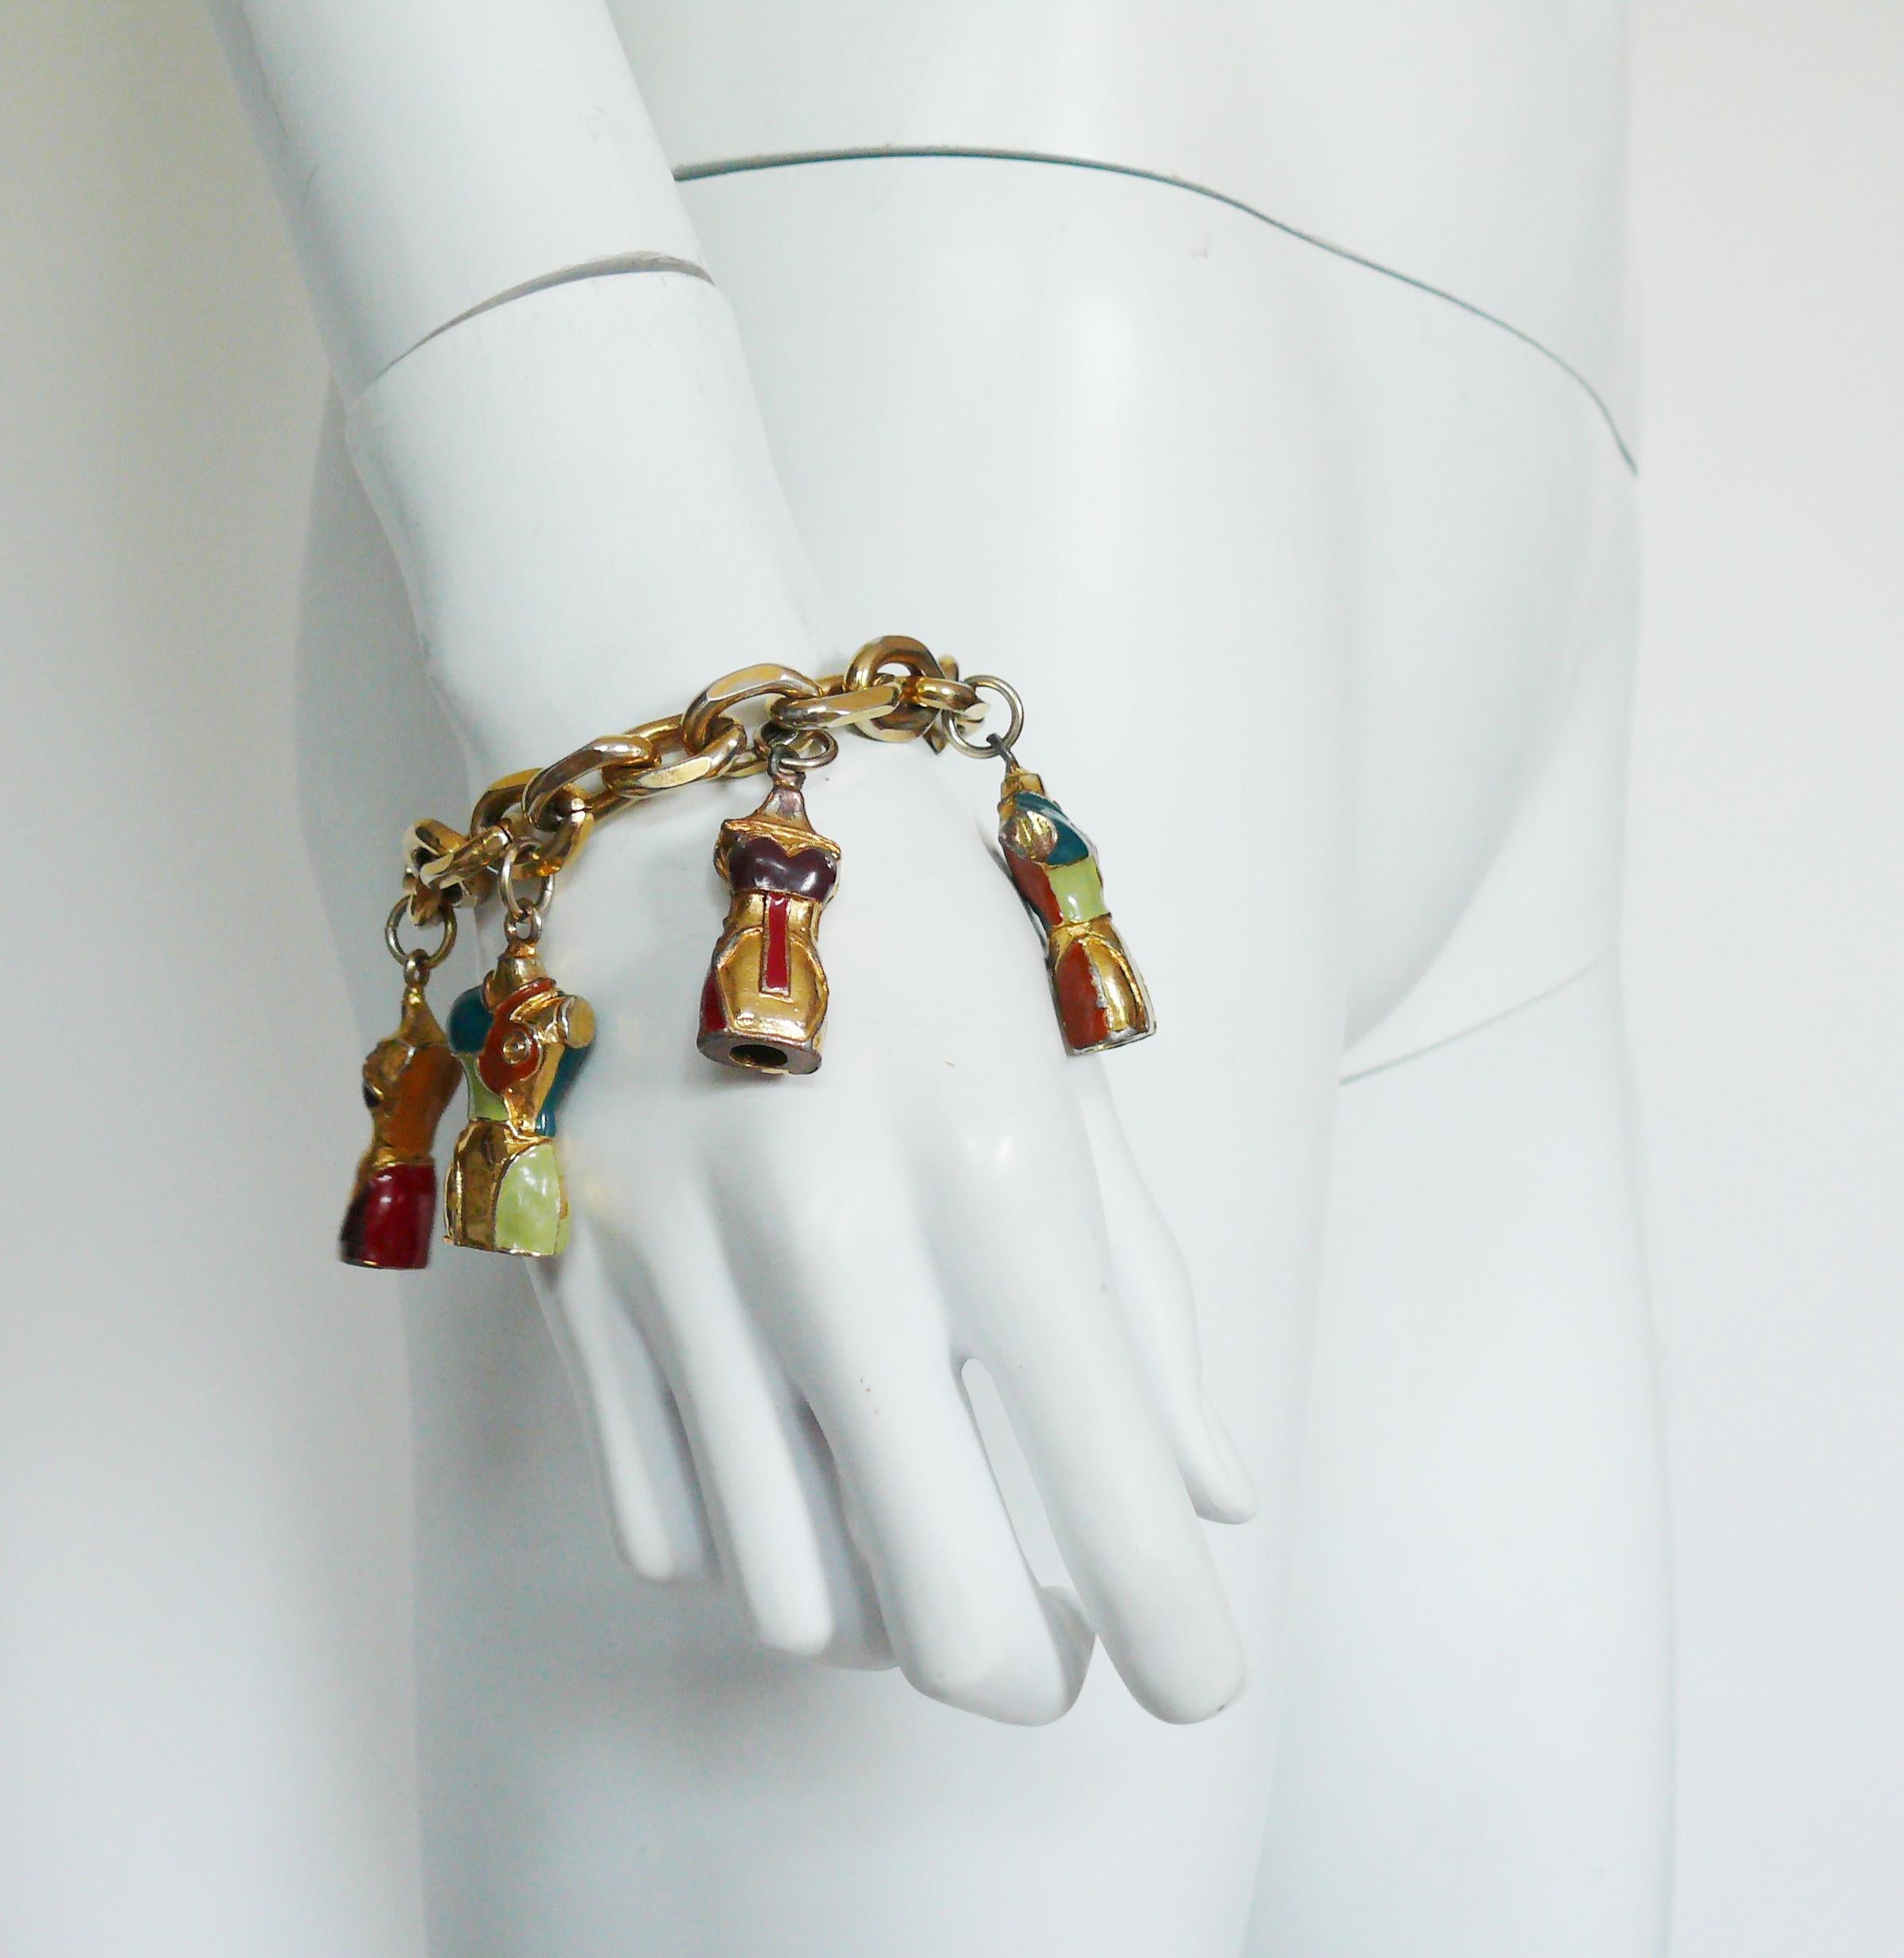 JEAN PAUL GAULTIER vintage gold toned link bracelet featuring iconic enameled bust charms.

Rare and collectable.

T-bar closure.

Has some weight on it.

Embossed GAULTIER.

Indicative measurements : length approx. 20 cm (7.87 inches) / bust charms